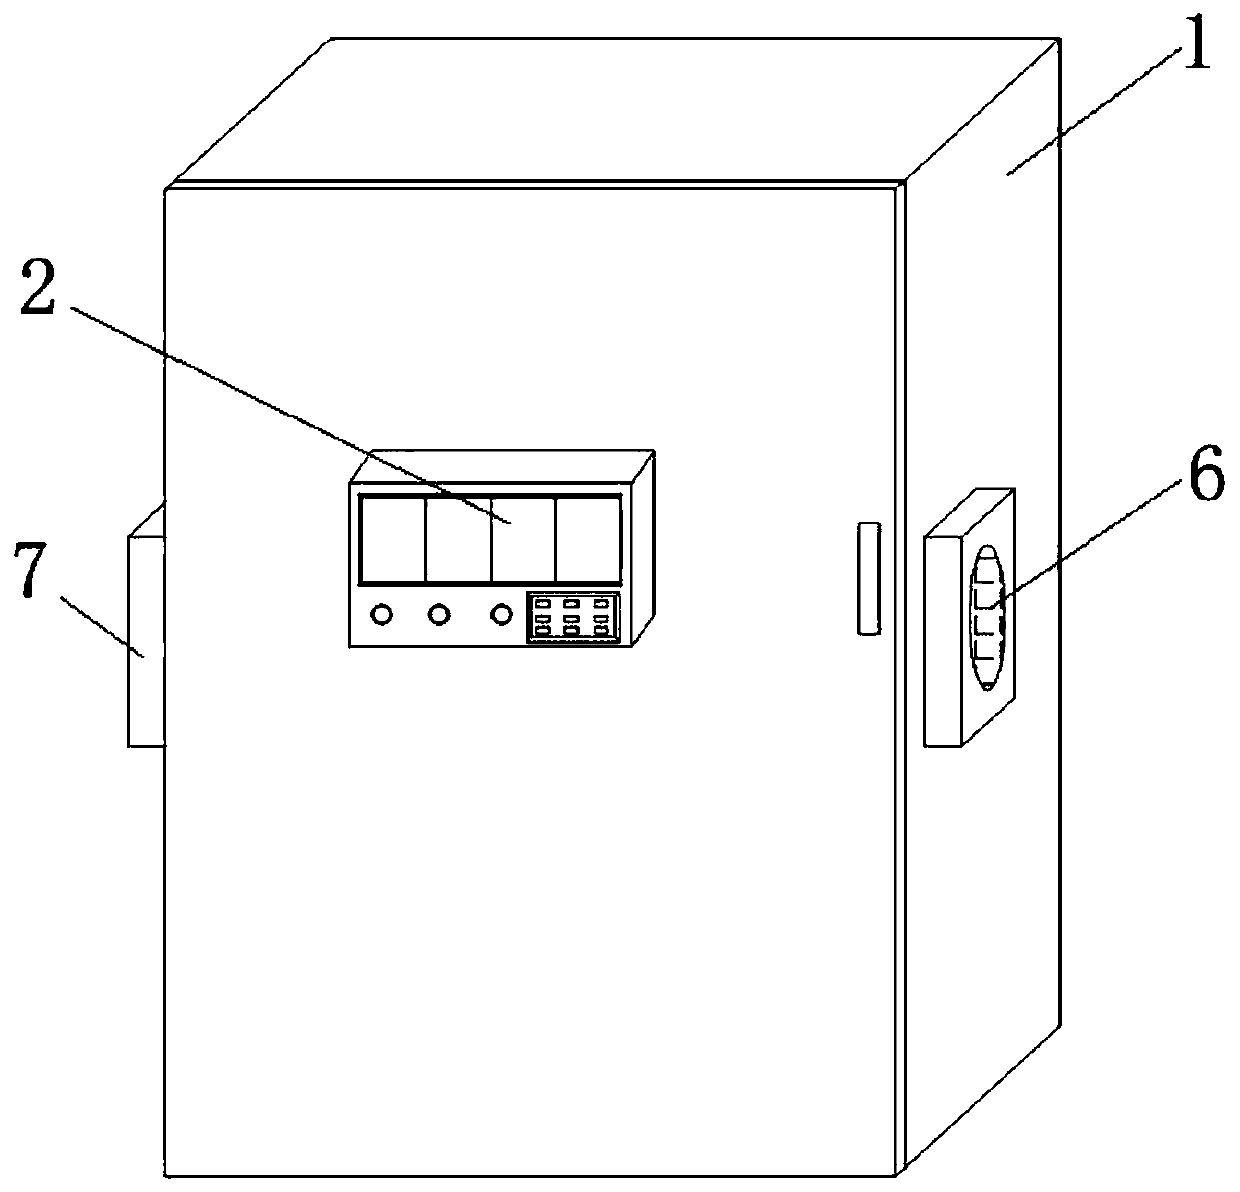 A distribution box based on visual intelligent controller